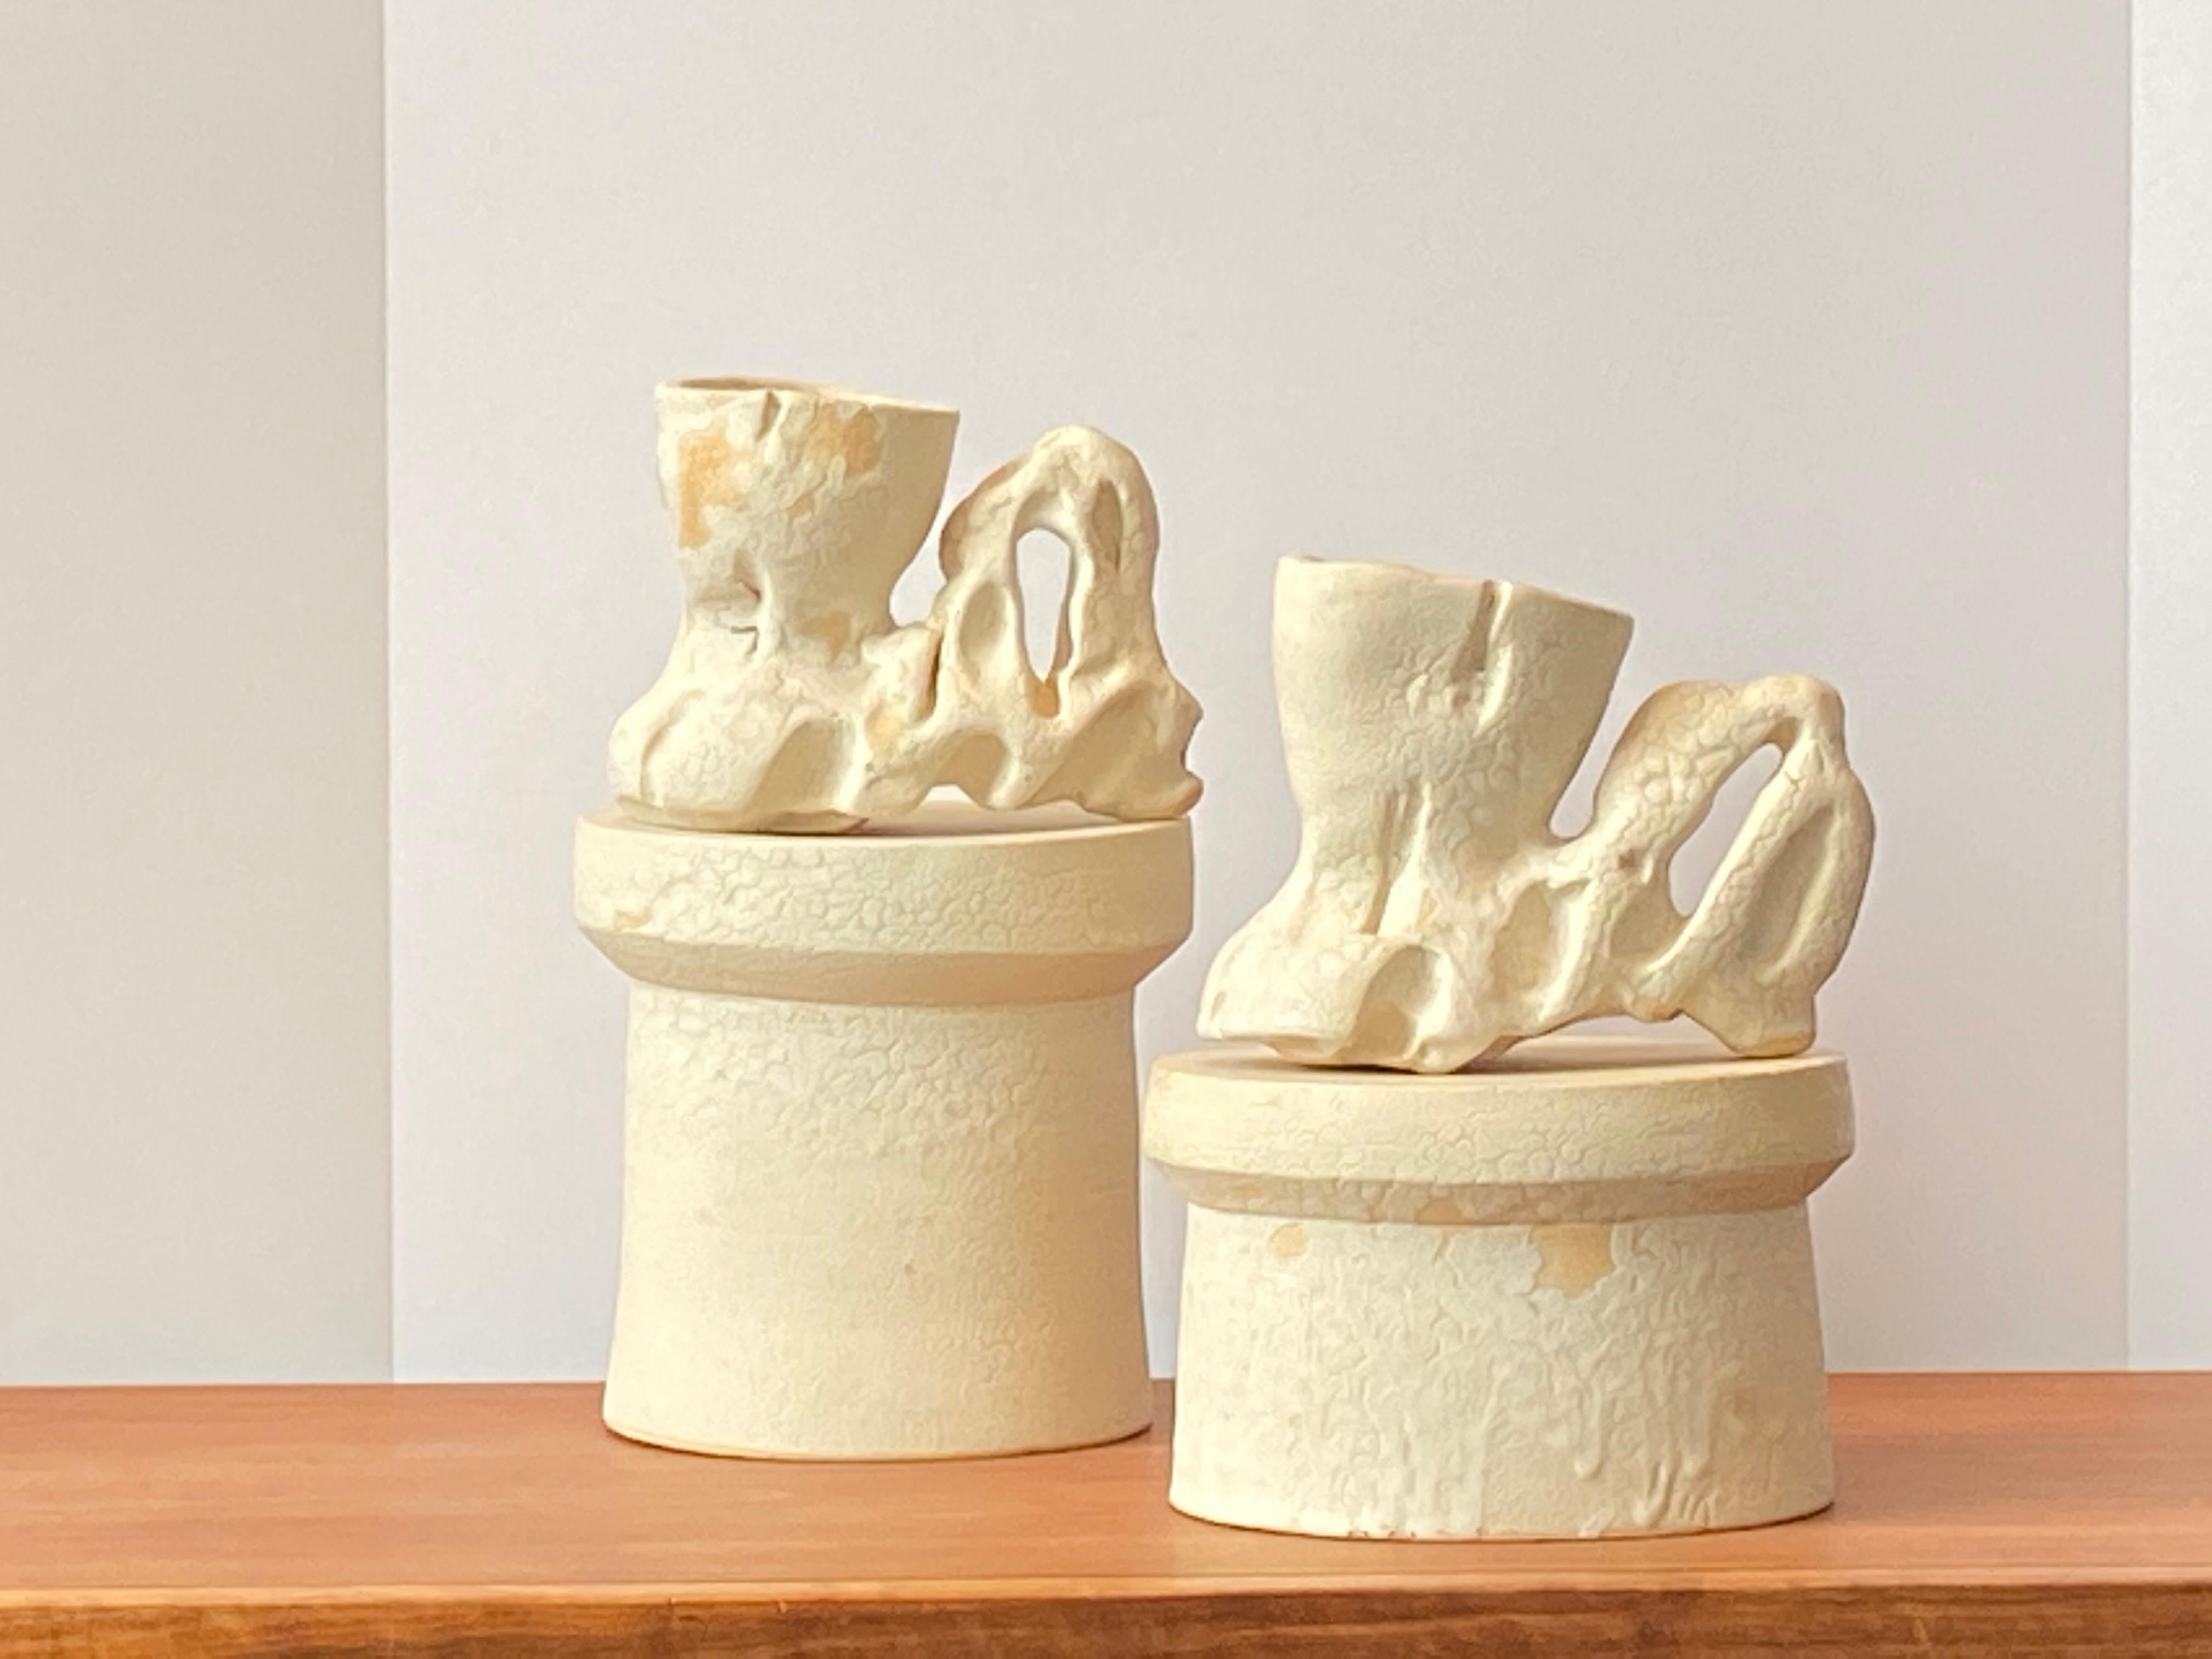 Richard Hirsch Ceramic Creamy White Primal Cups with Stands, 2018 In Excellent Condition For Sale In New York, NY